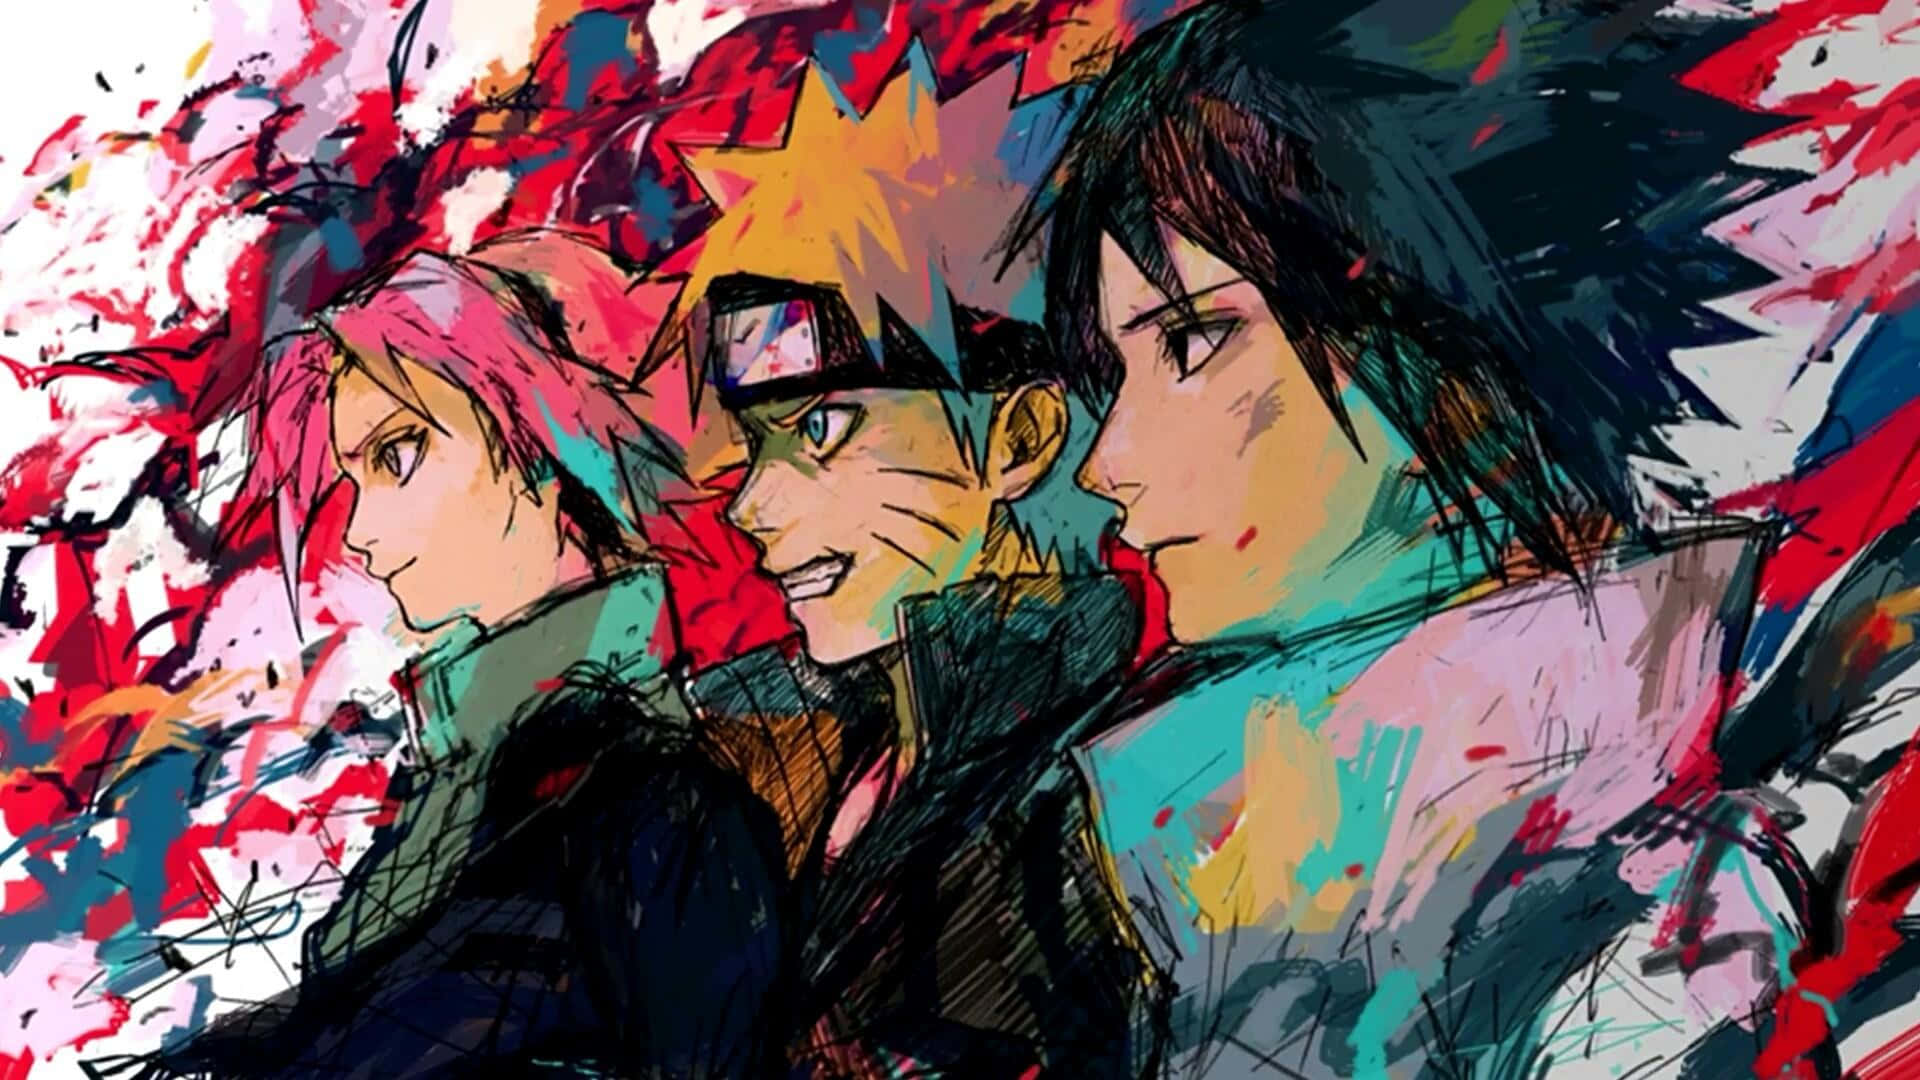 200+] Naruto Iphone Wallpapers